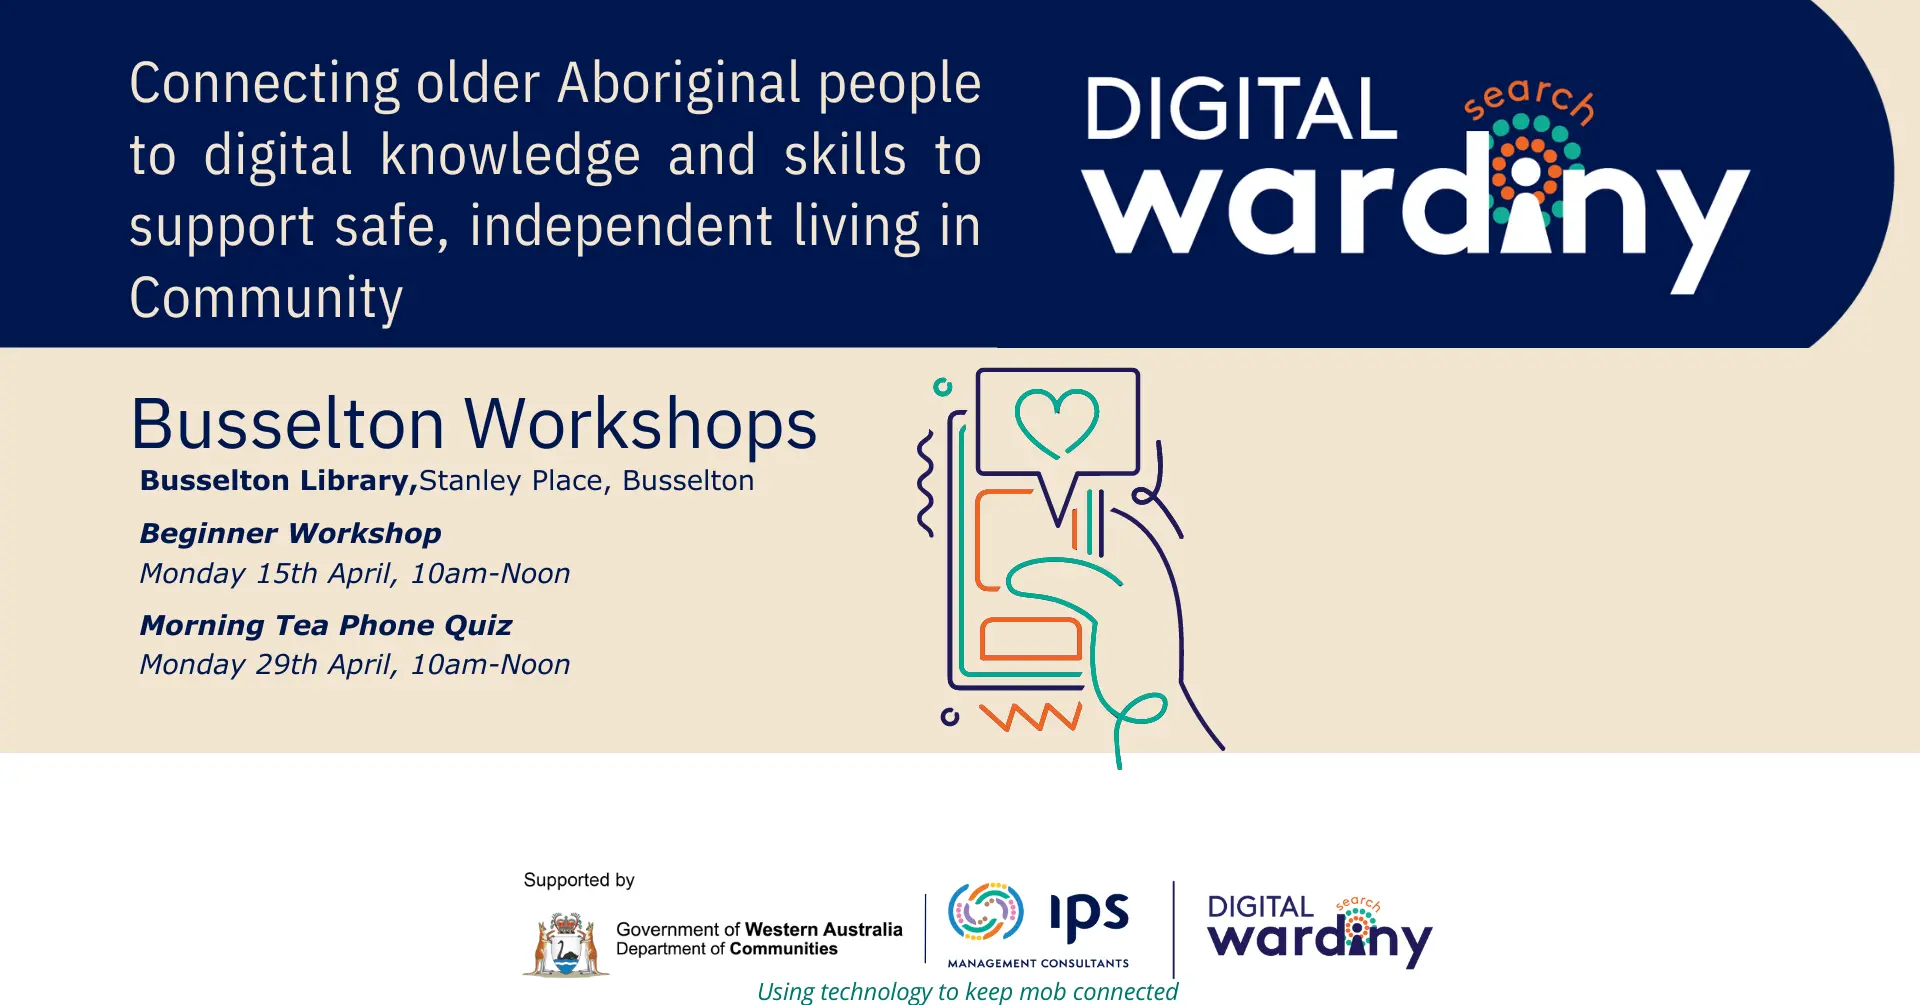 Digital Wardiny Workshop, these workshops, supported by the WA Department of Communities, are tailored to address the specific needs and interests of our community.